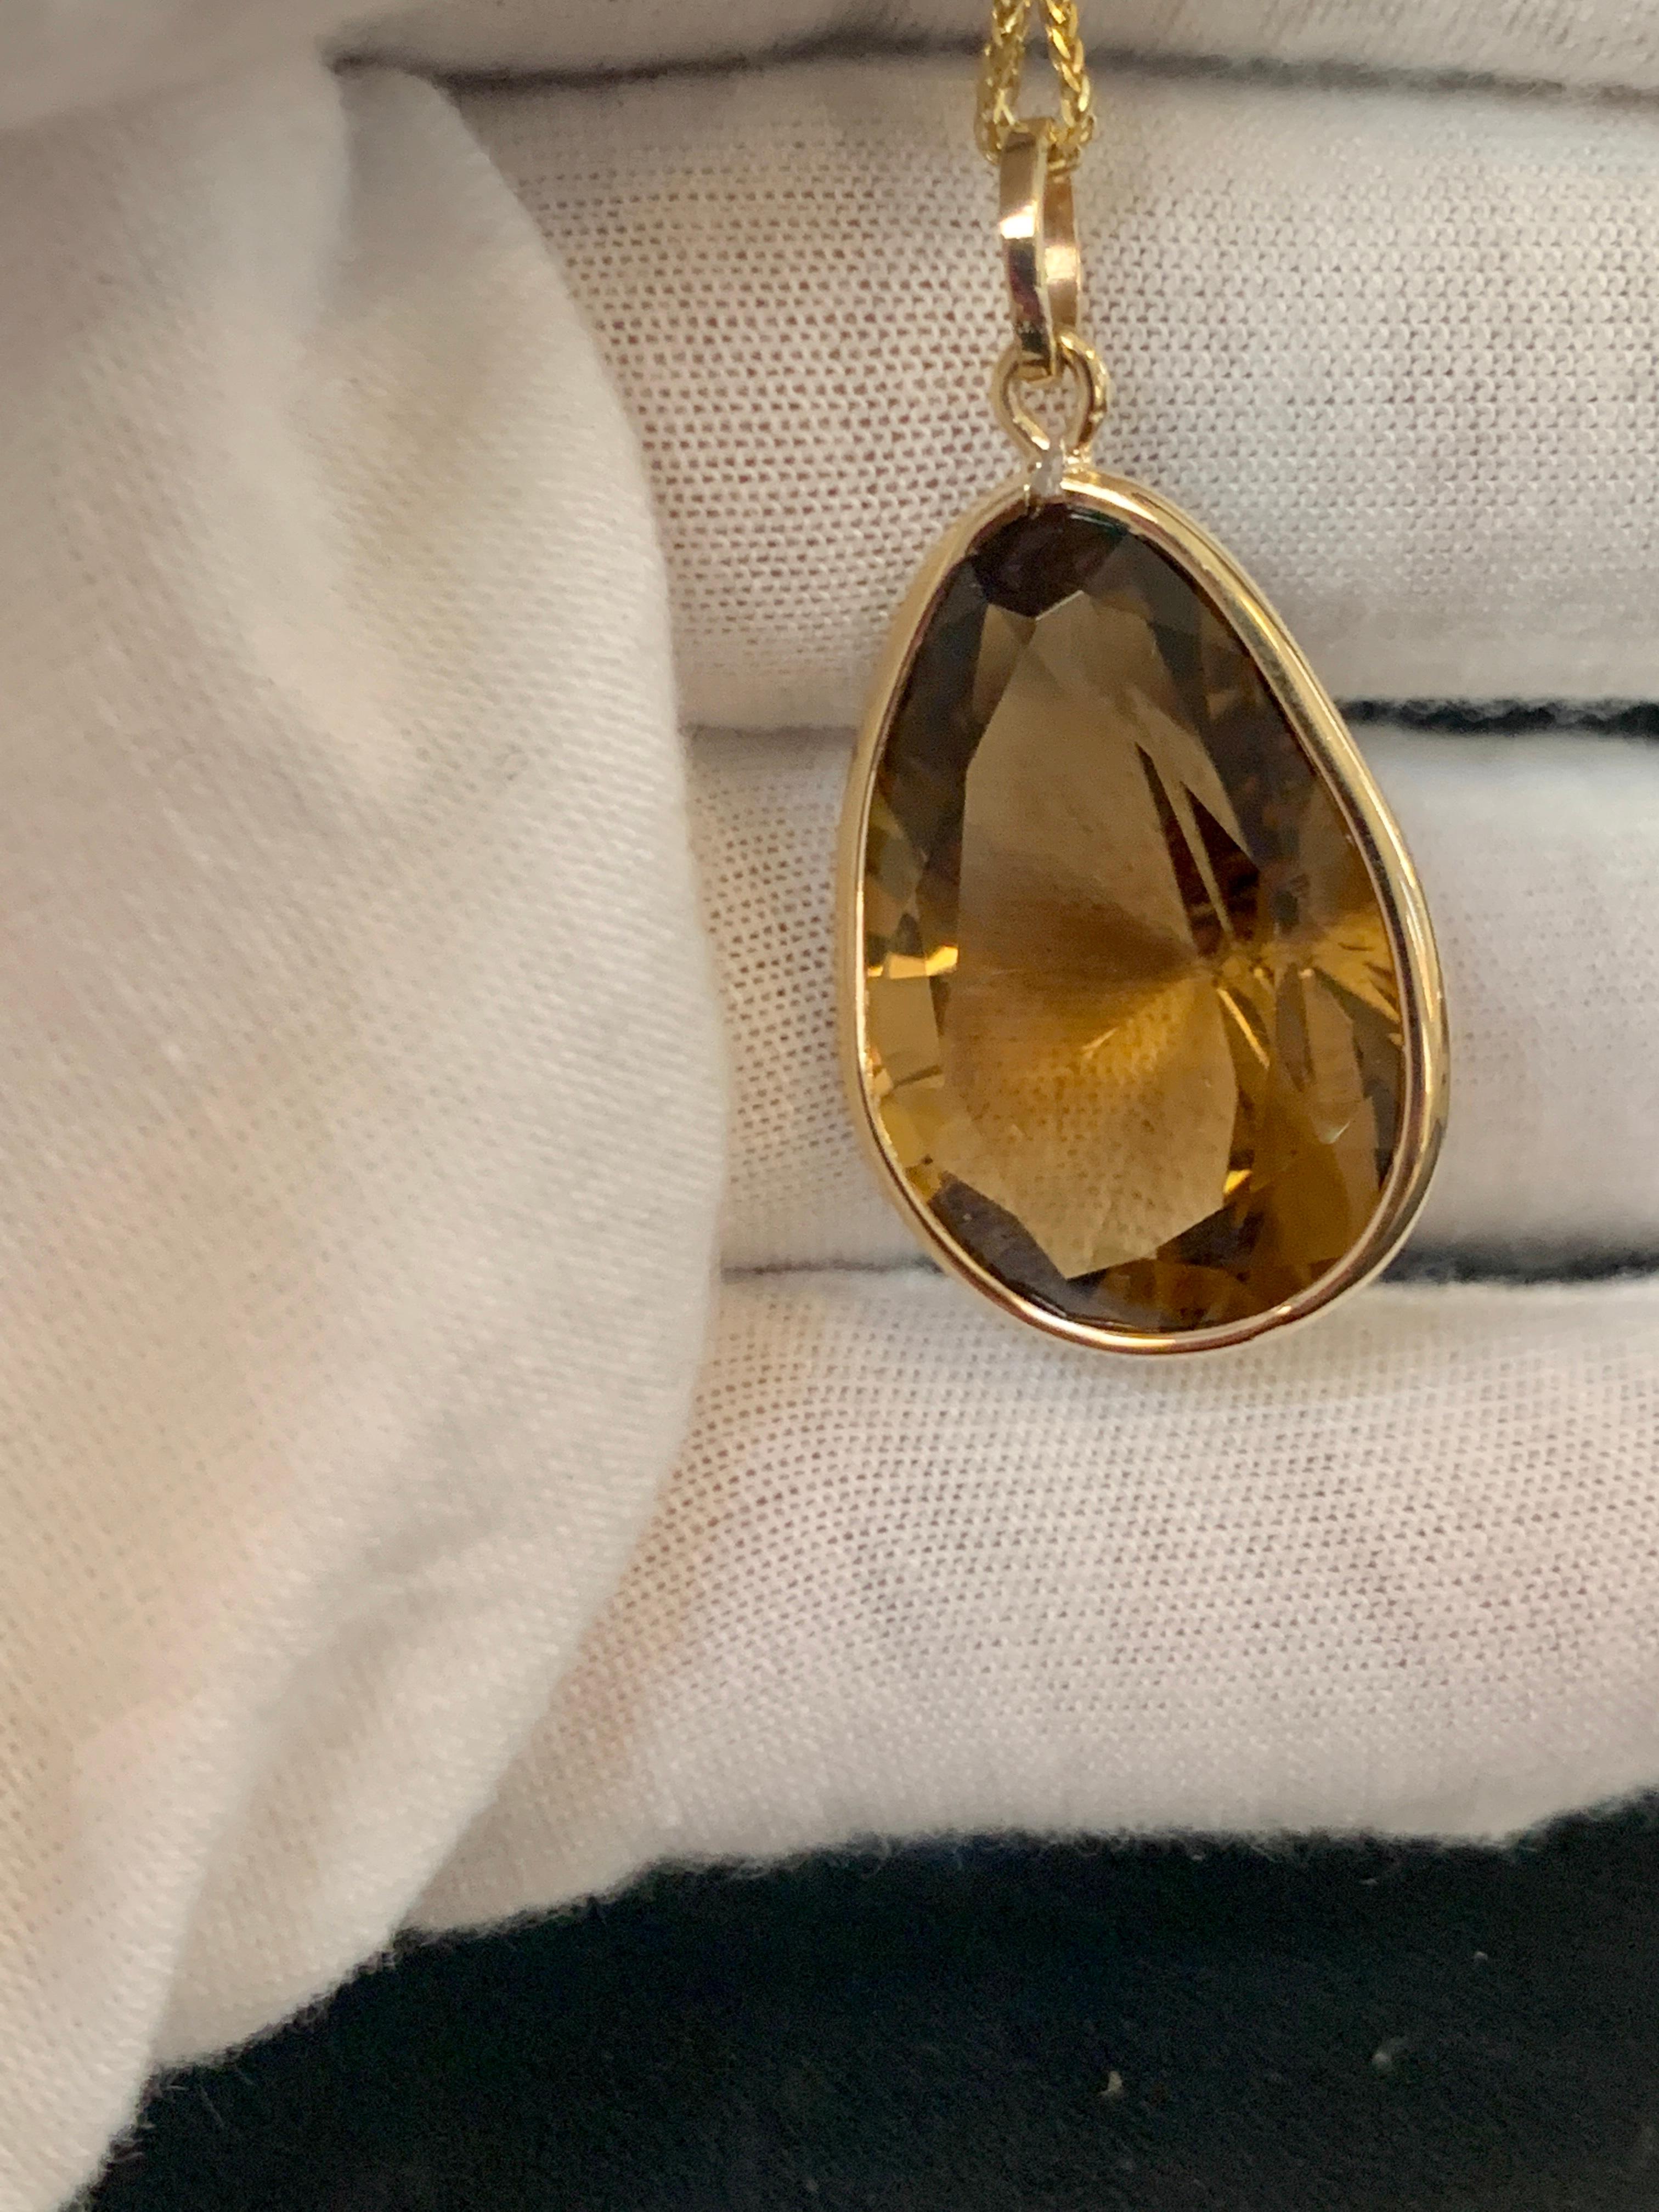 Emerald Cut 19 Carat Pear Shape Citrine Pendent or Necklace 14 Karat Yellow Gold with Chain